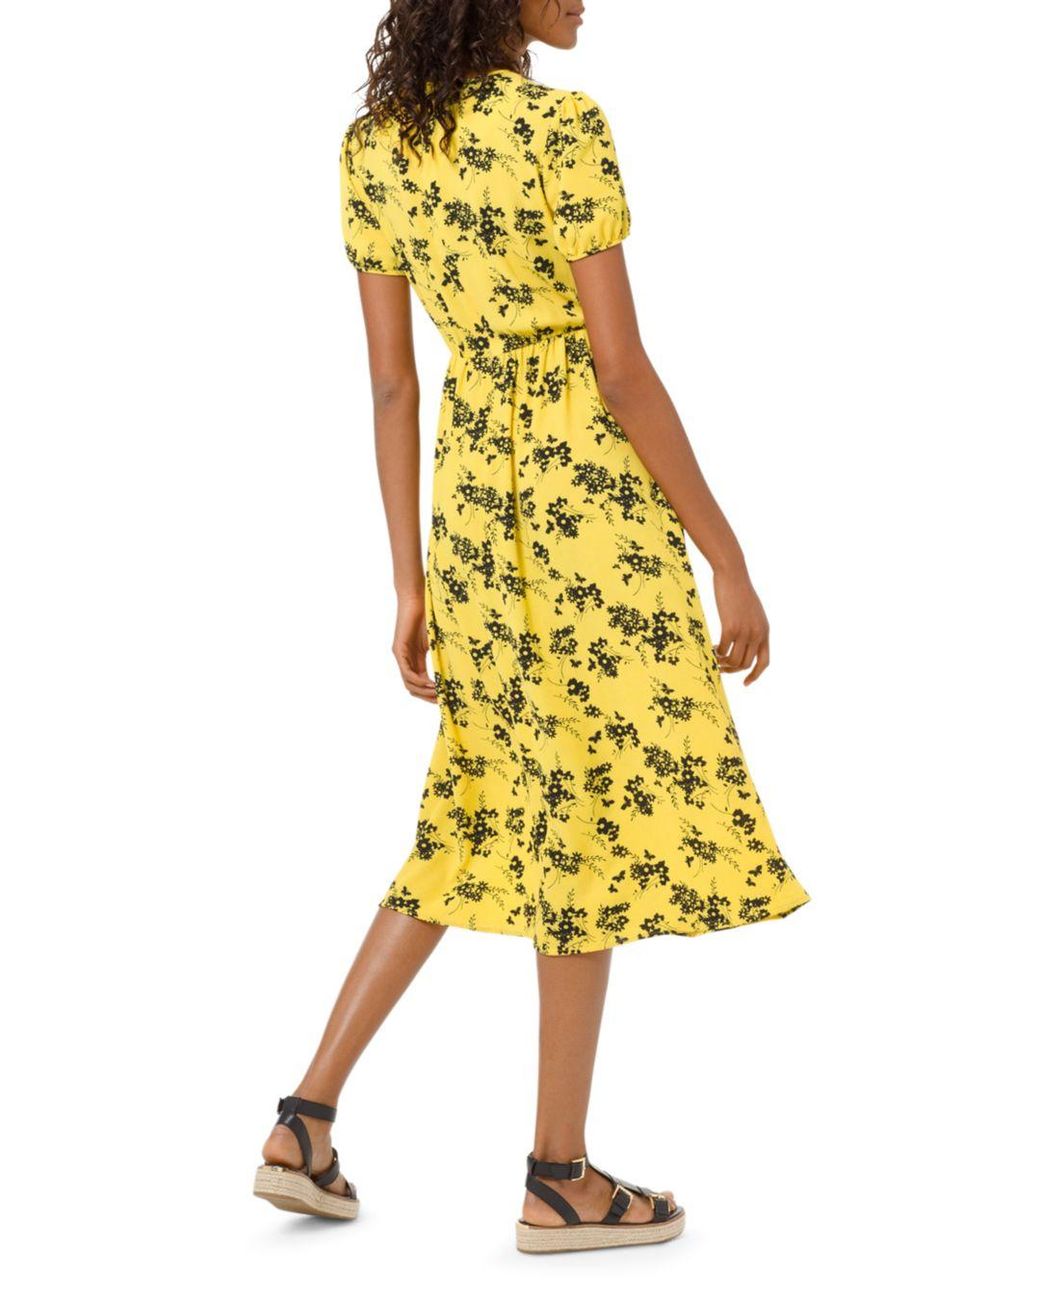 Michael Kors Synthetic Botanical Pintucked Dress in Golden Yellow/Black  (Yellow) | Lyst